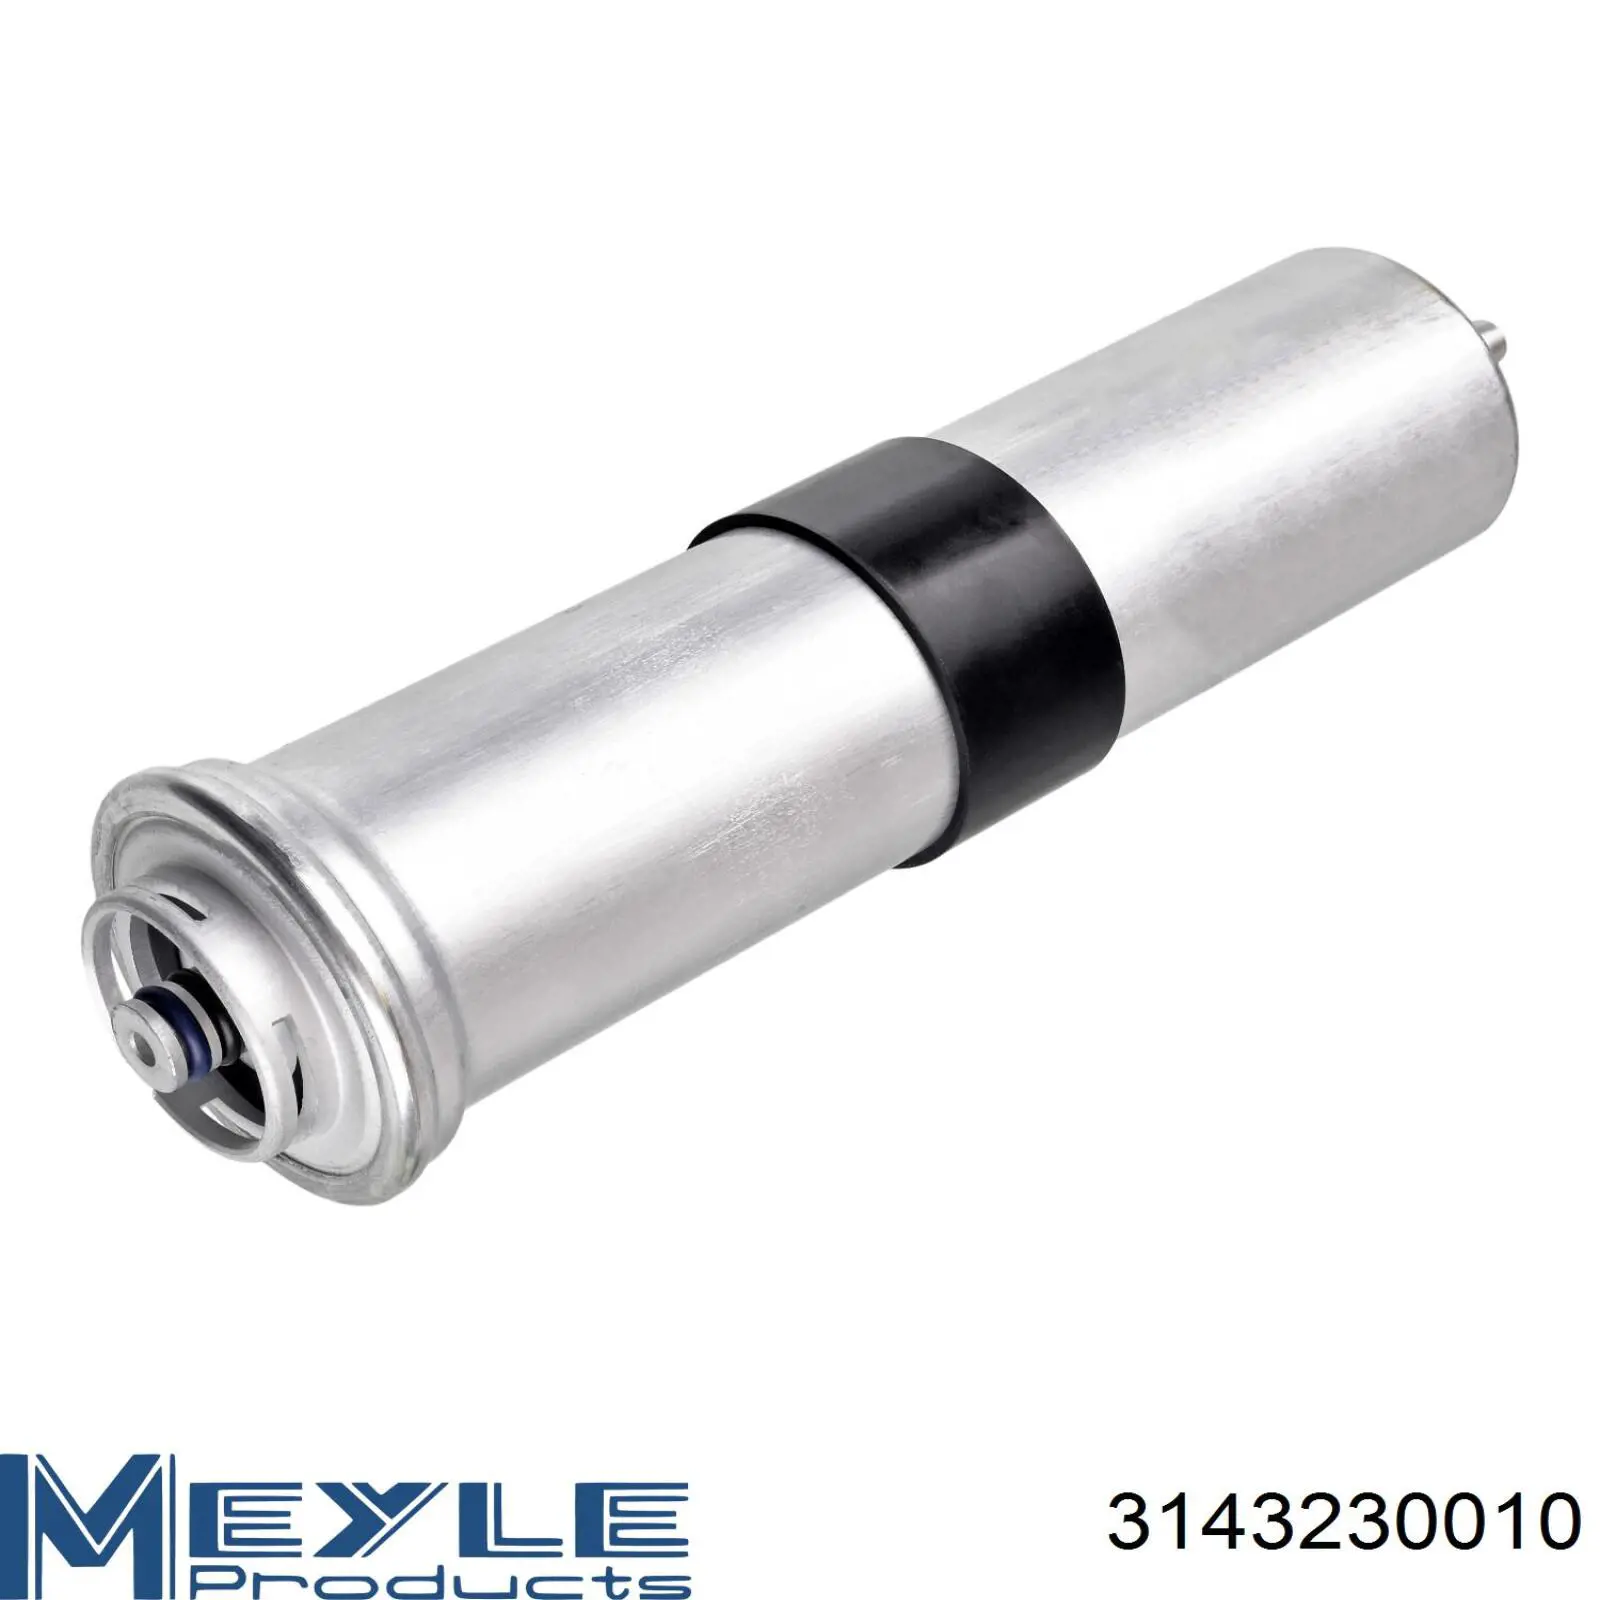 3143230010 Meyle filtro combustible